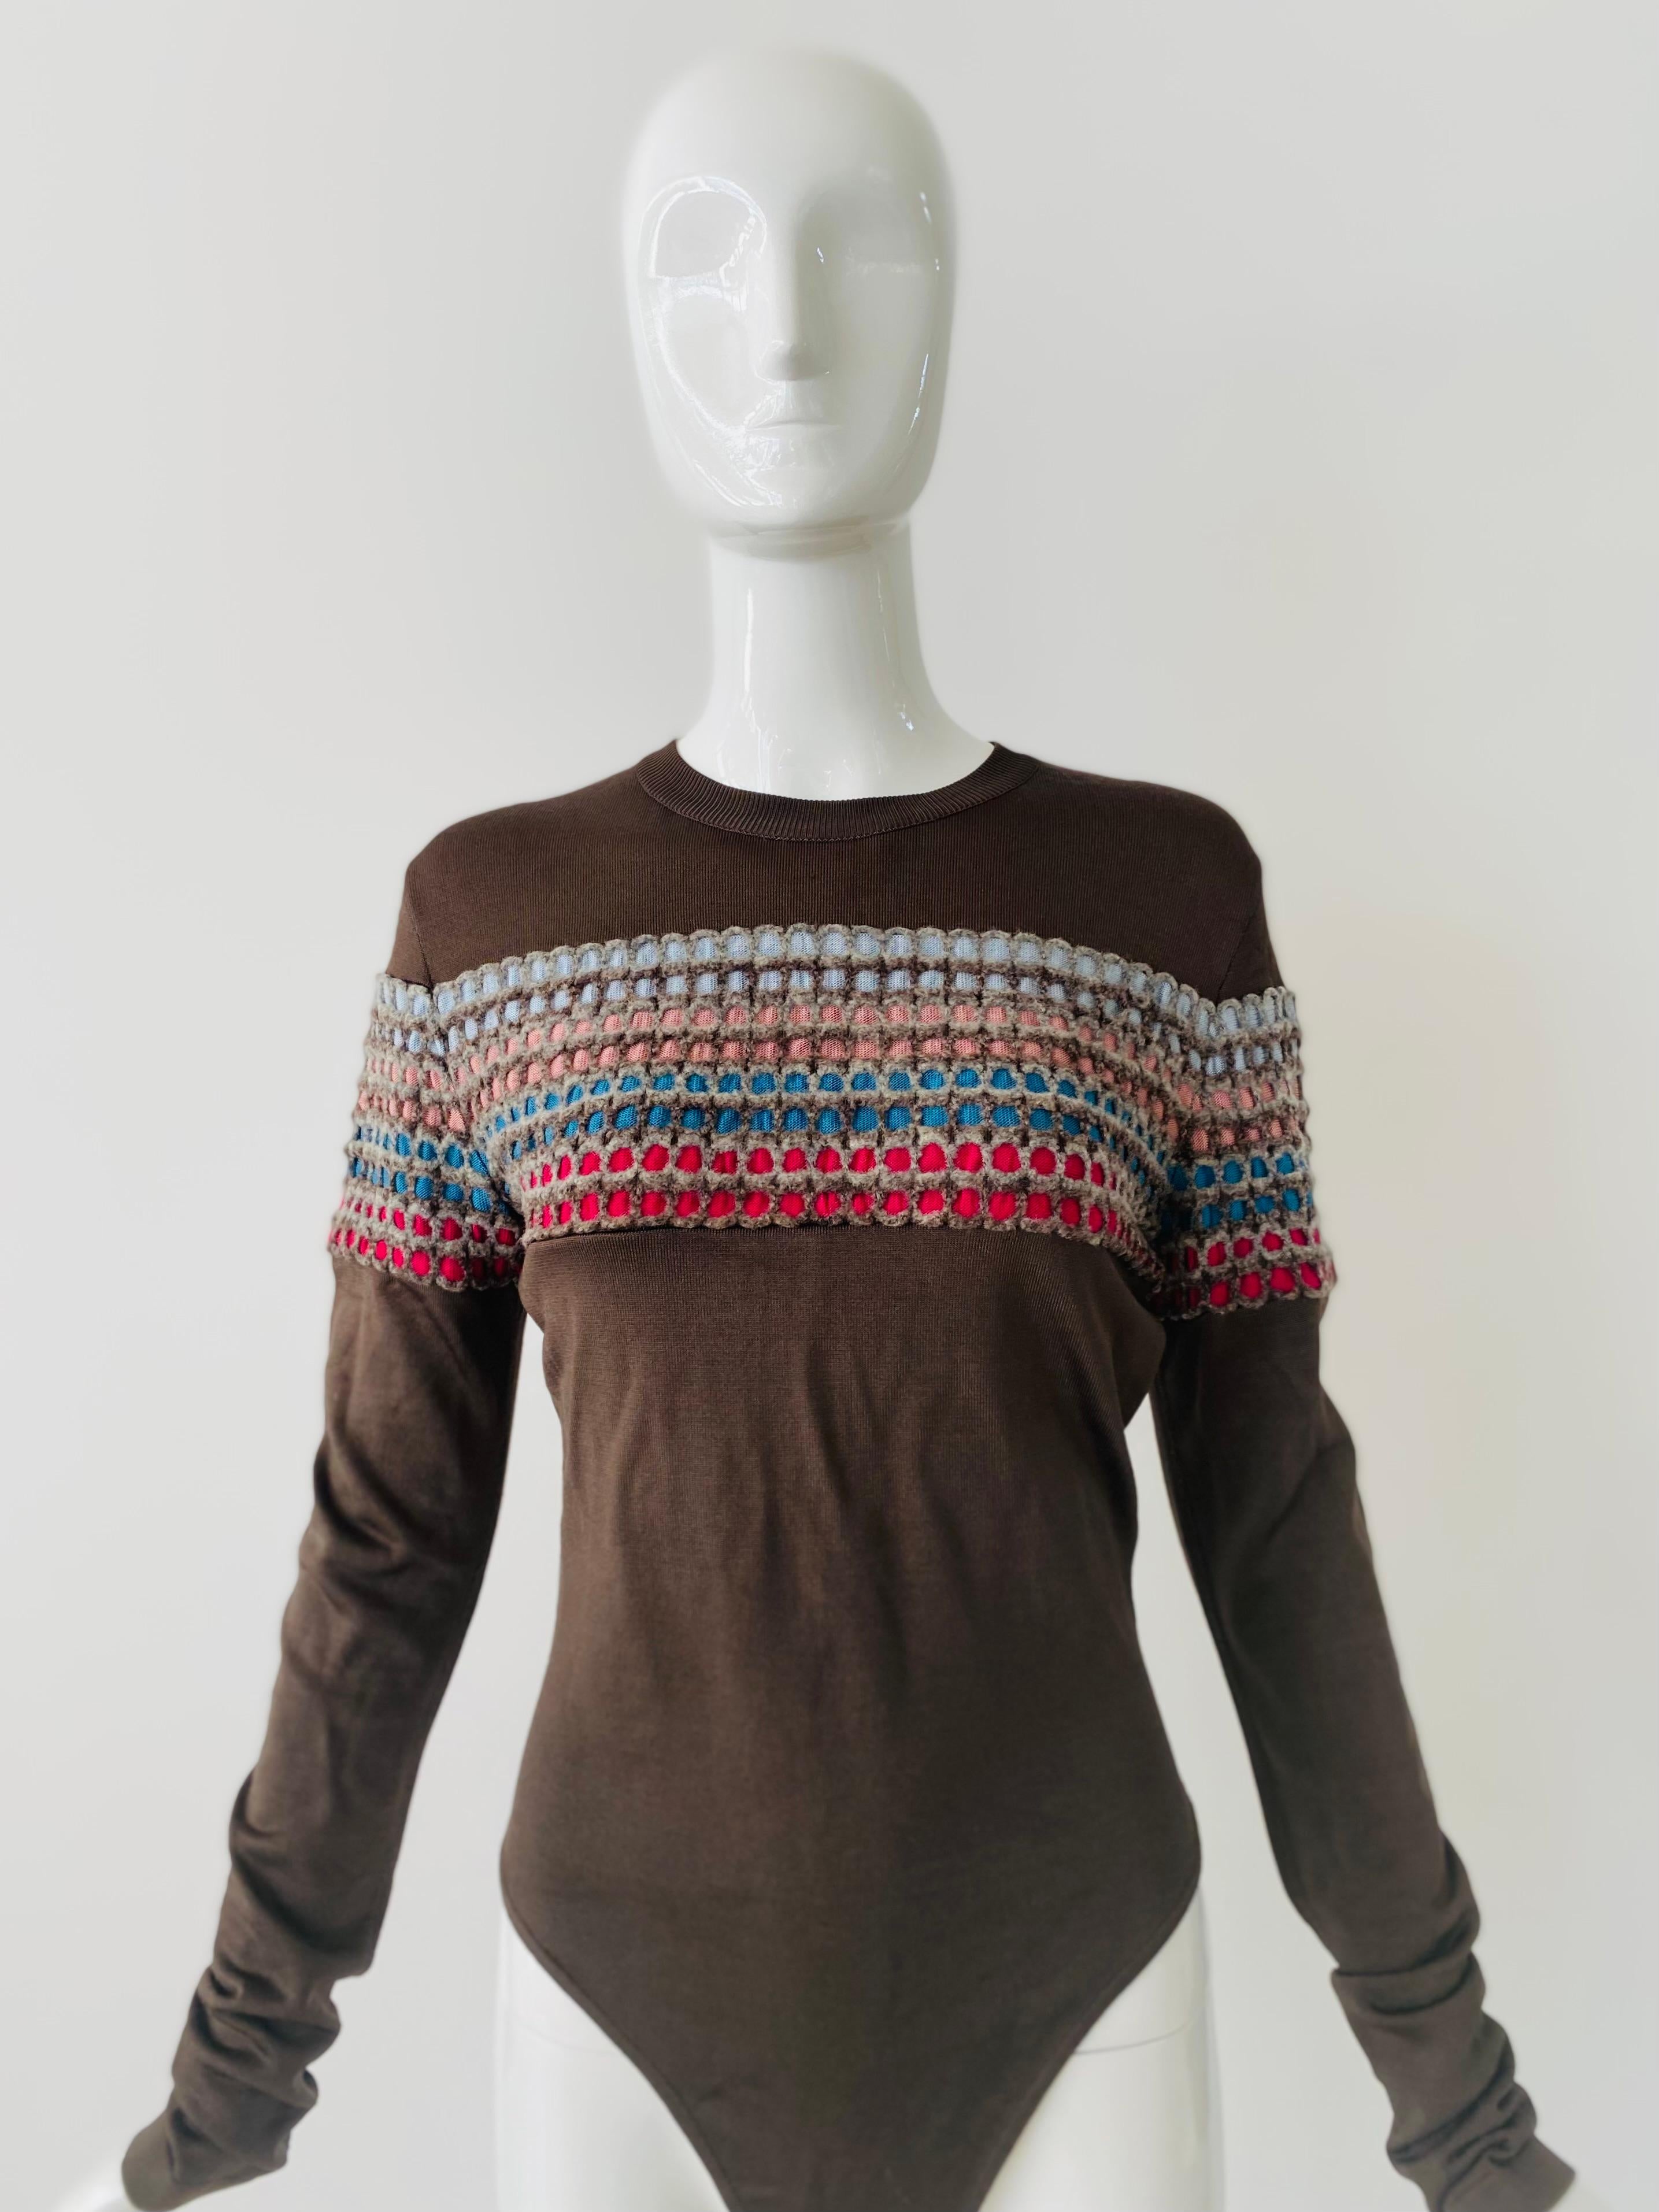 1990s iconic Alaia knit bodysuit in an olive green and rainbow honeycomb lines across the chest and upper arms.  The fabric is a mix of rayon, nylon and spandex for the classic Alaia fabric feel.  This bodysuit is labelled a M.